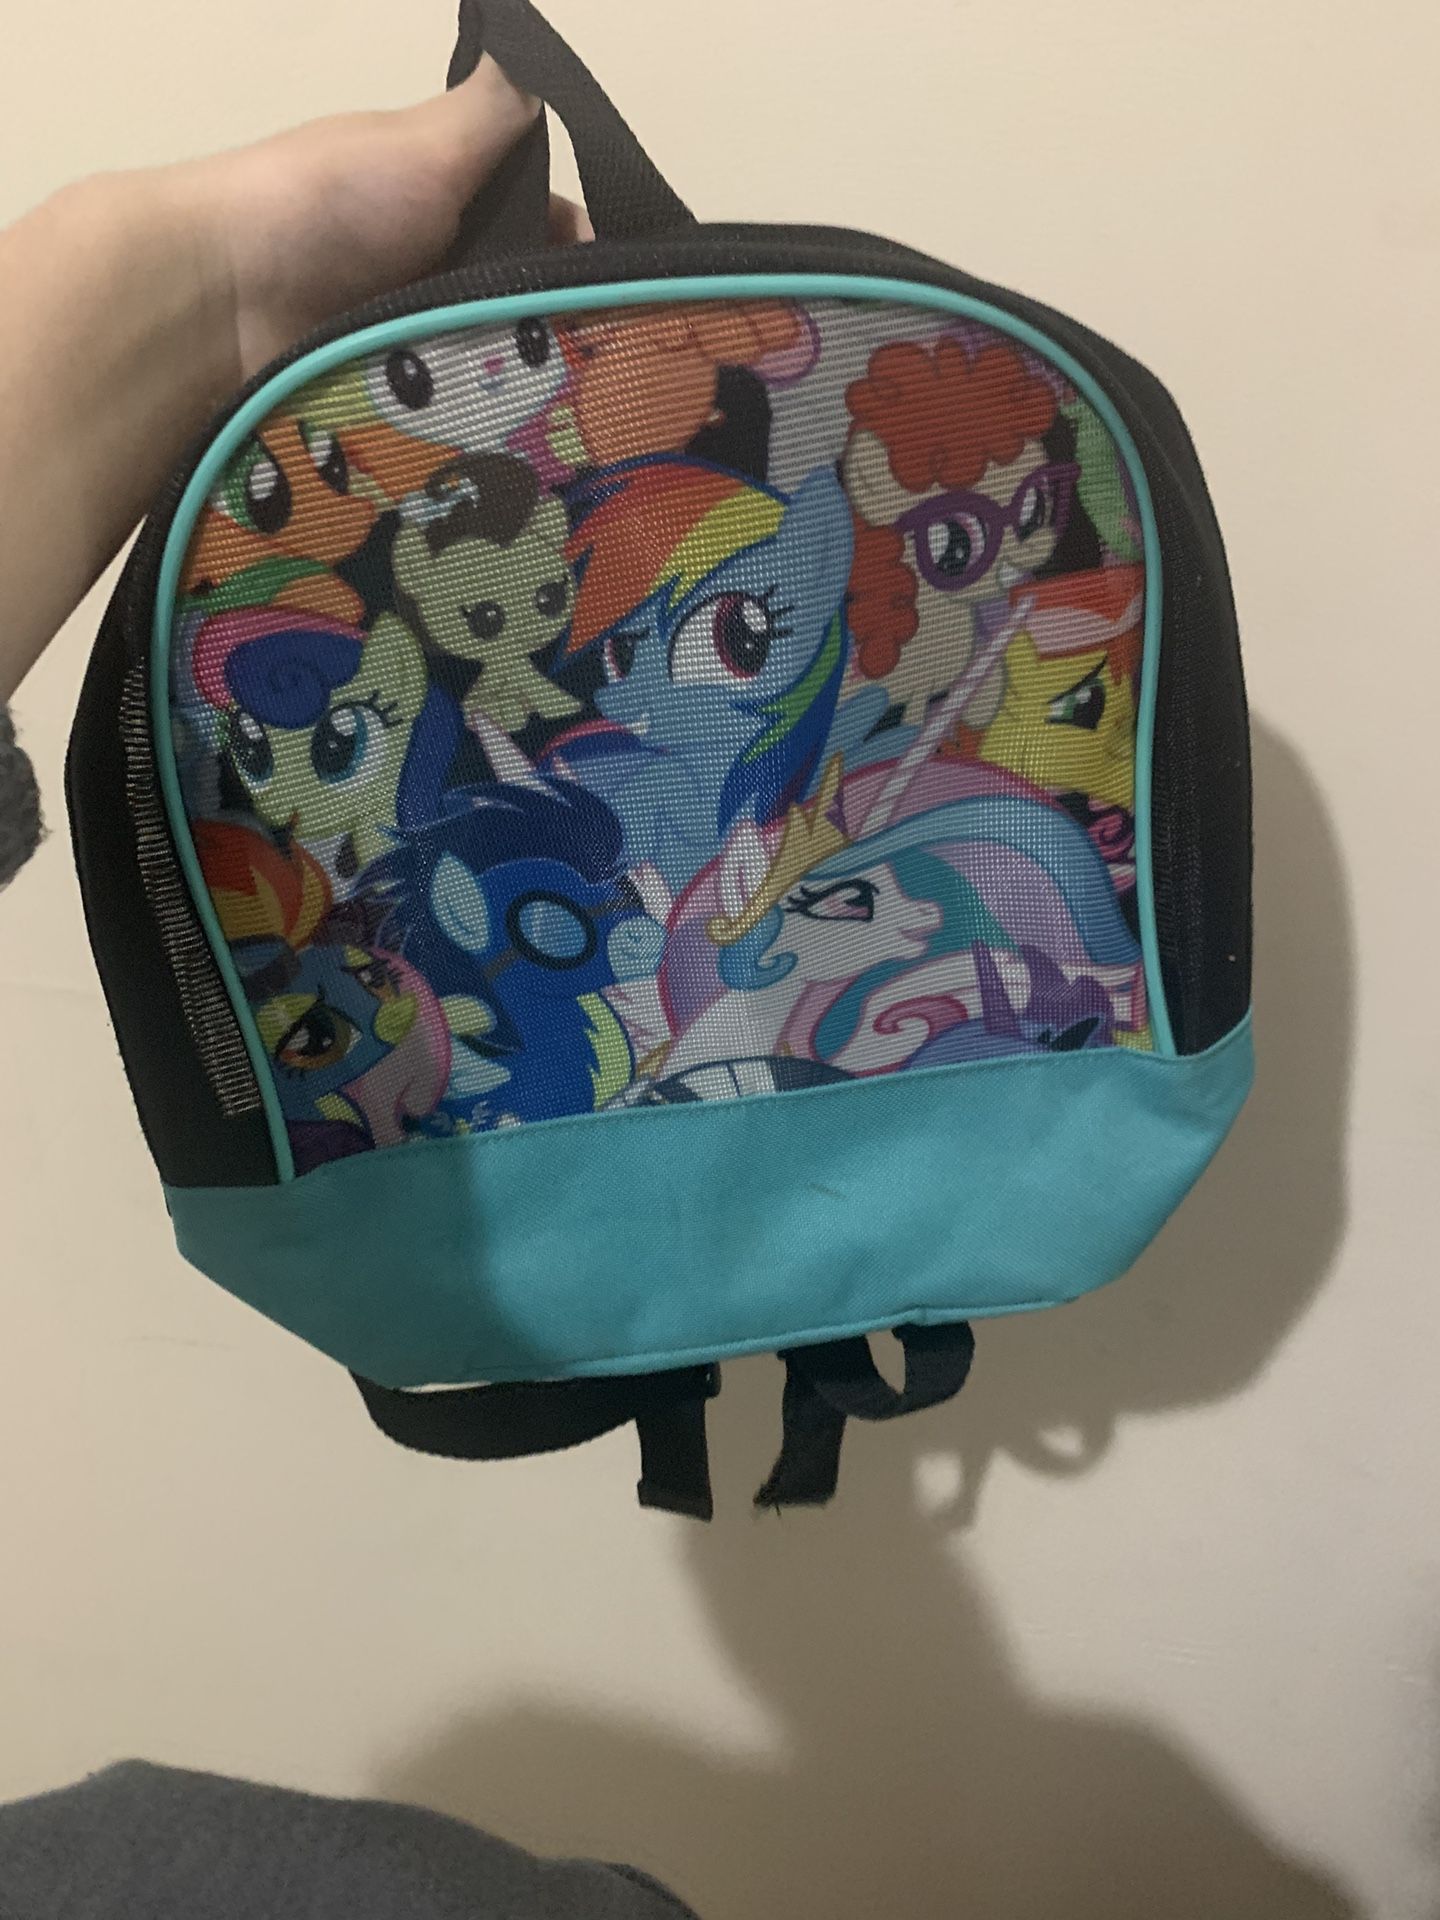 Kid My Little Pony Backpack $5